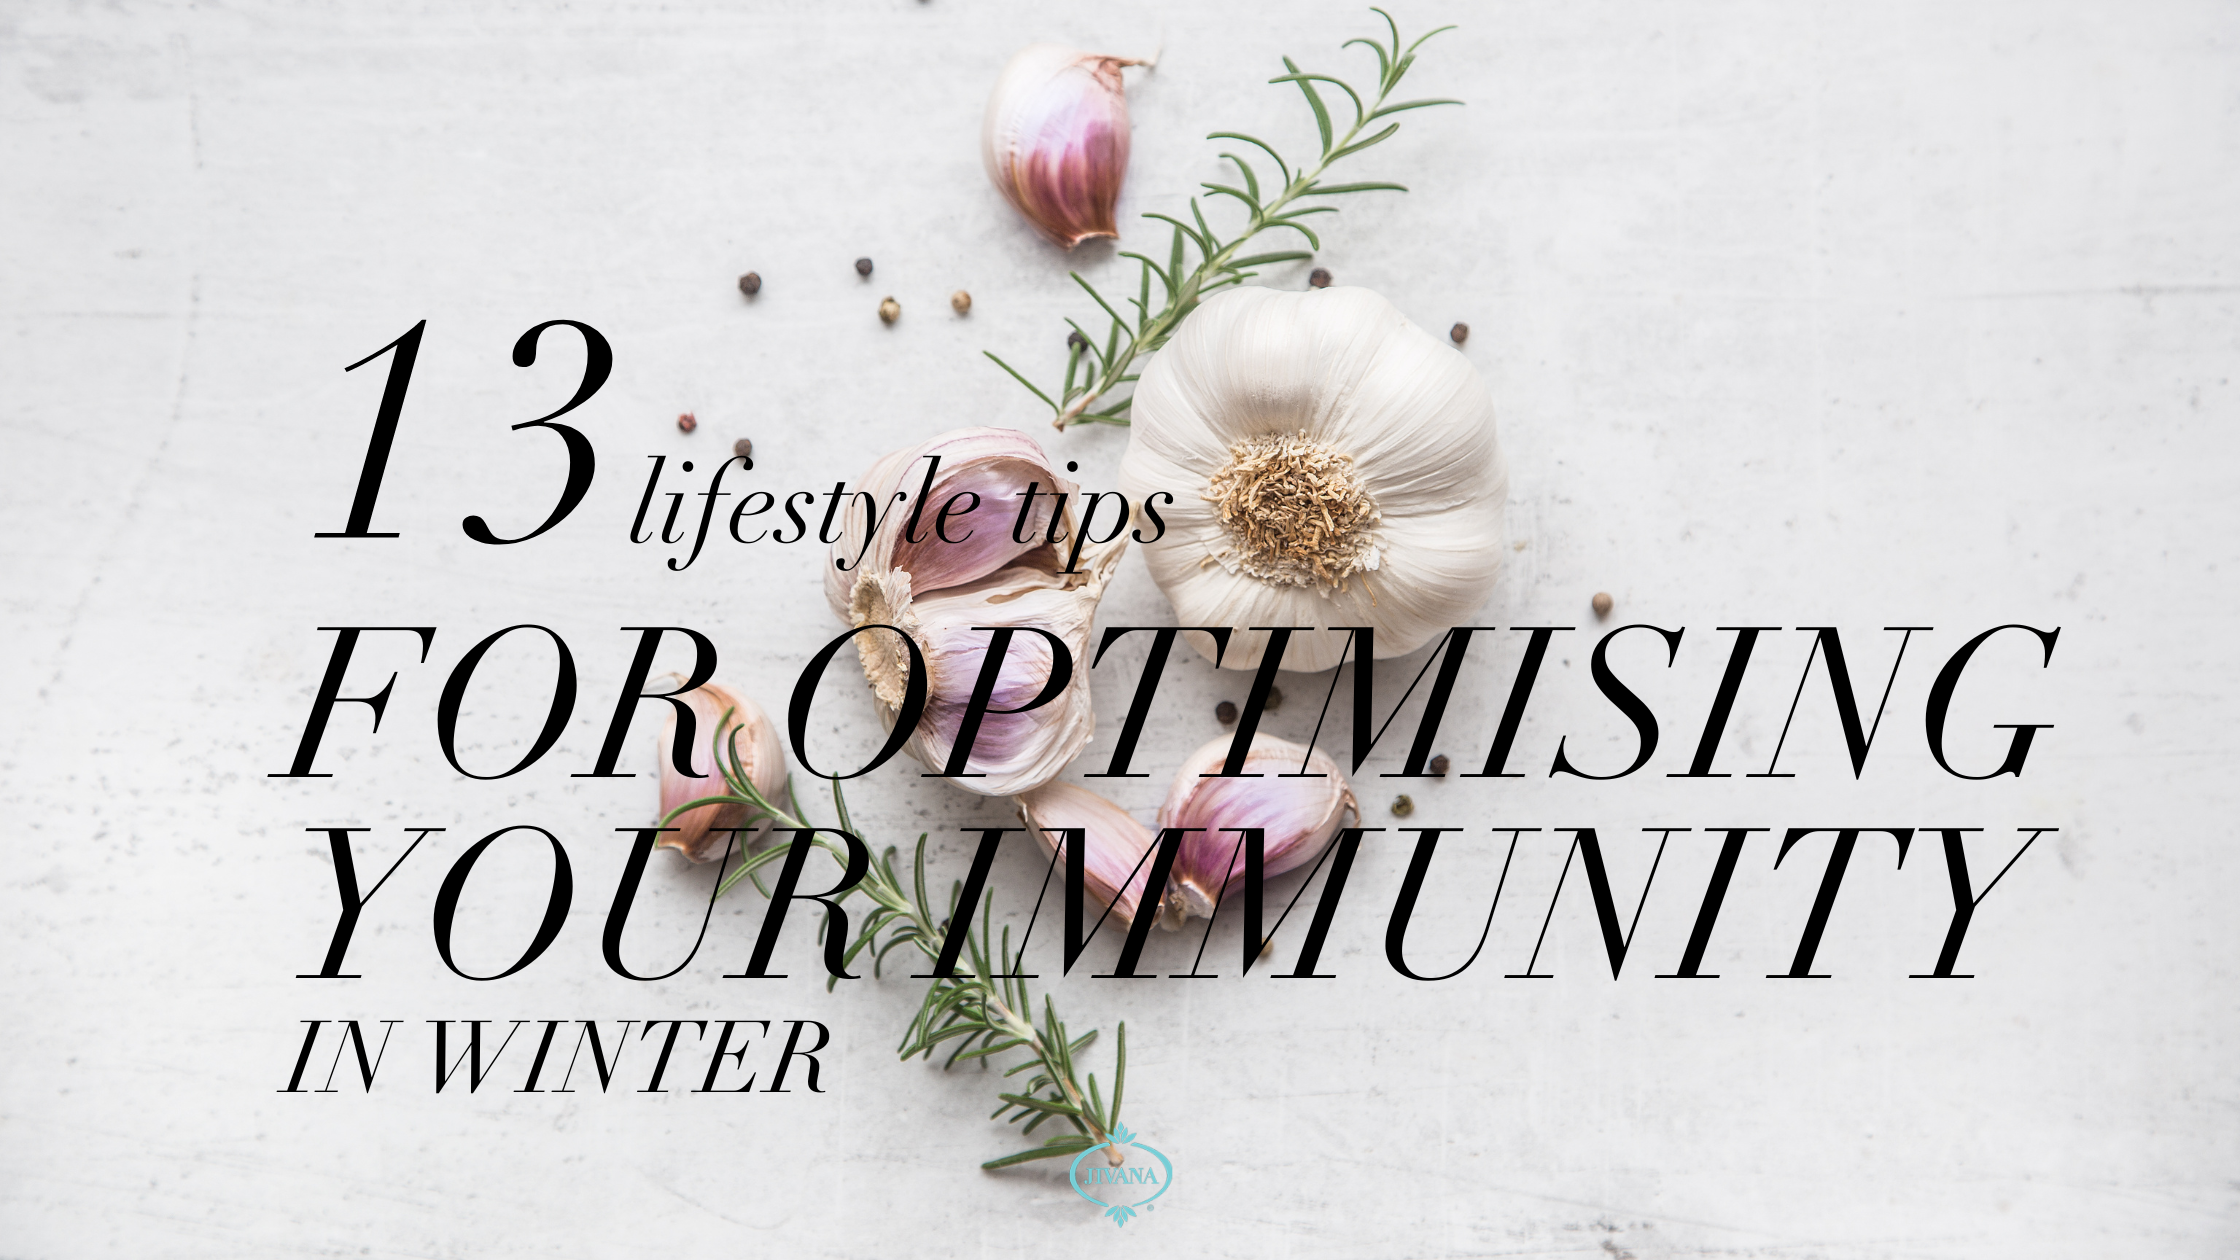 13 lifestyle tips for optimising your immunuty in winter